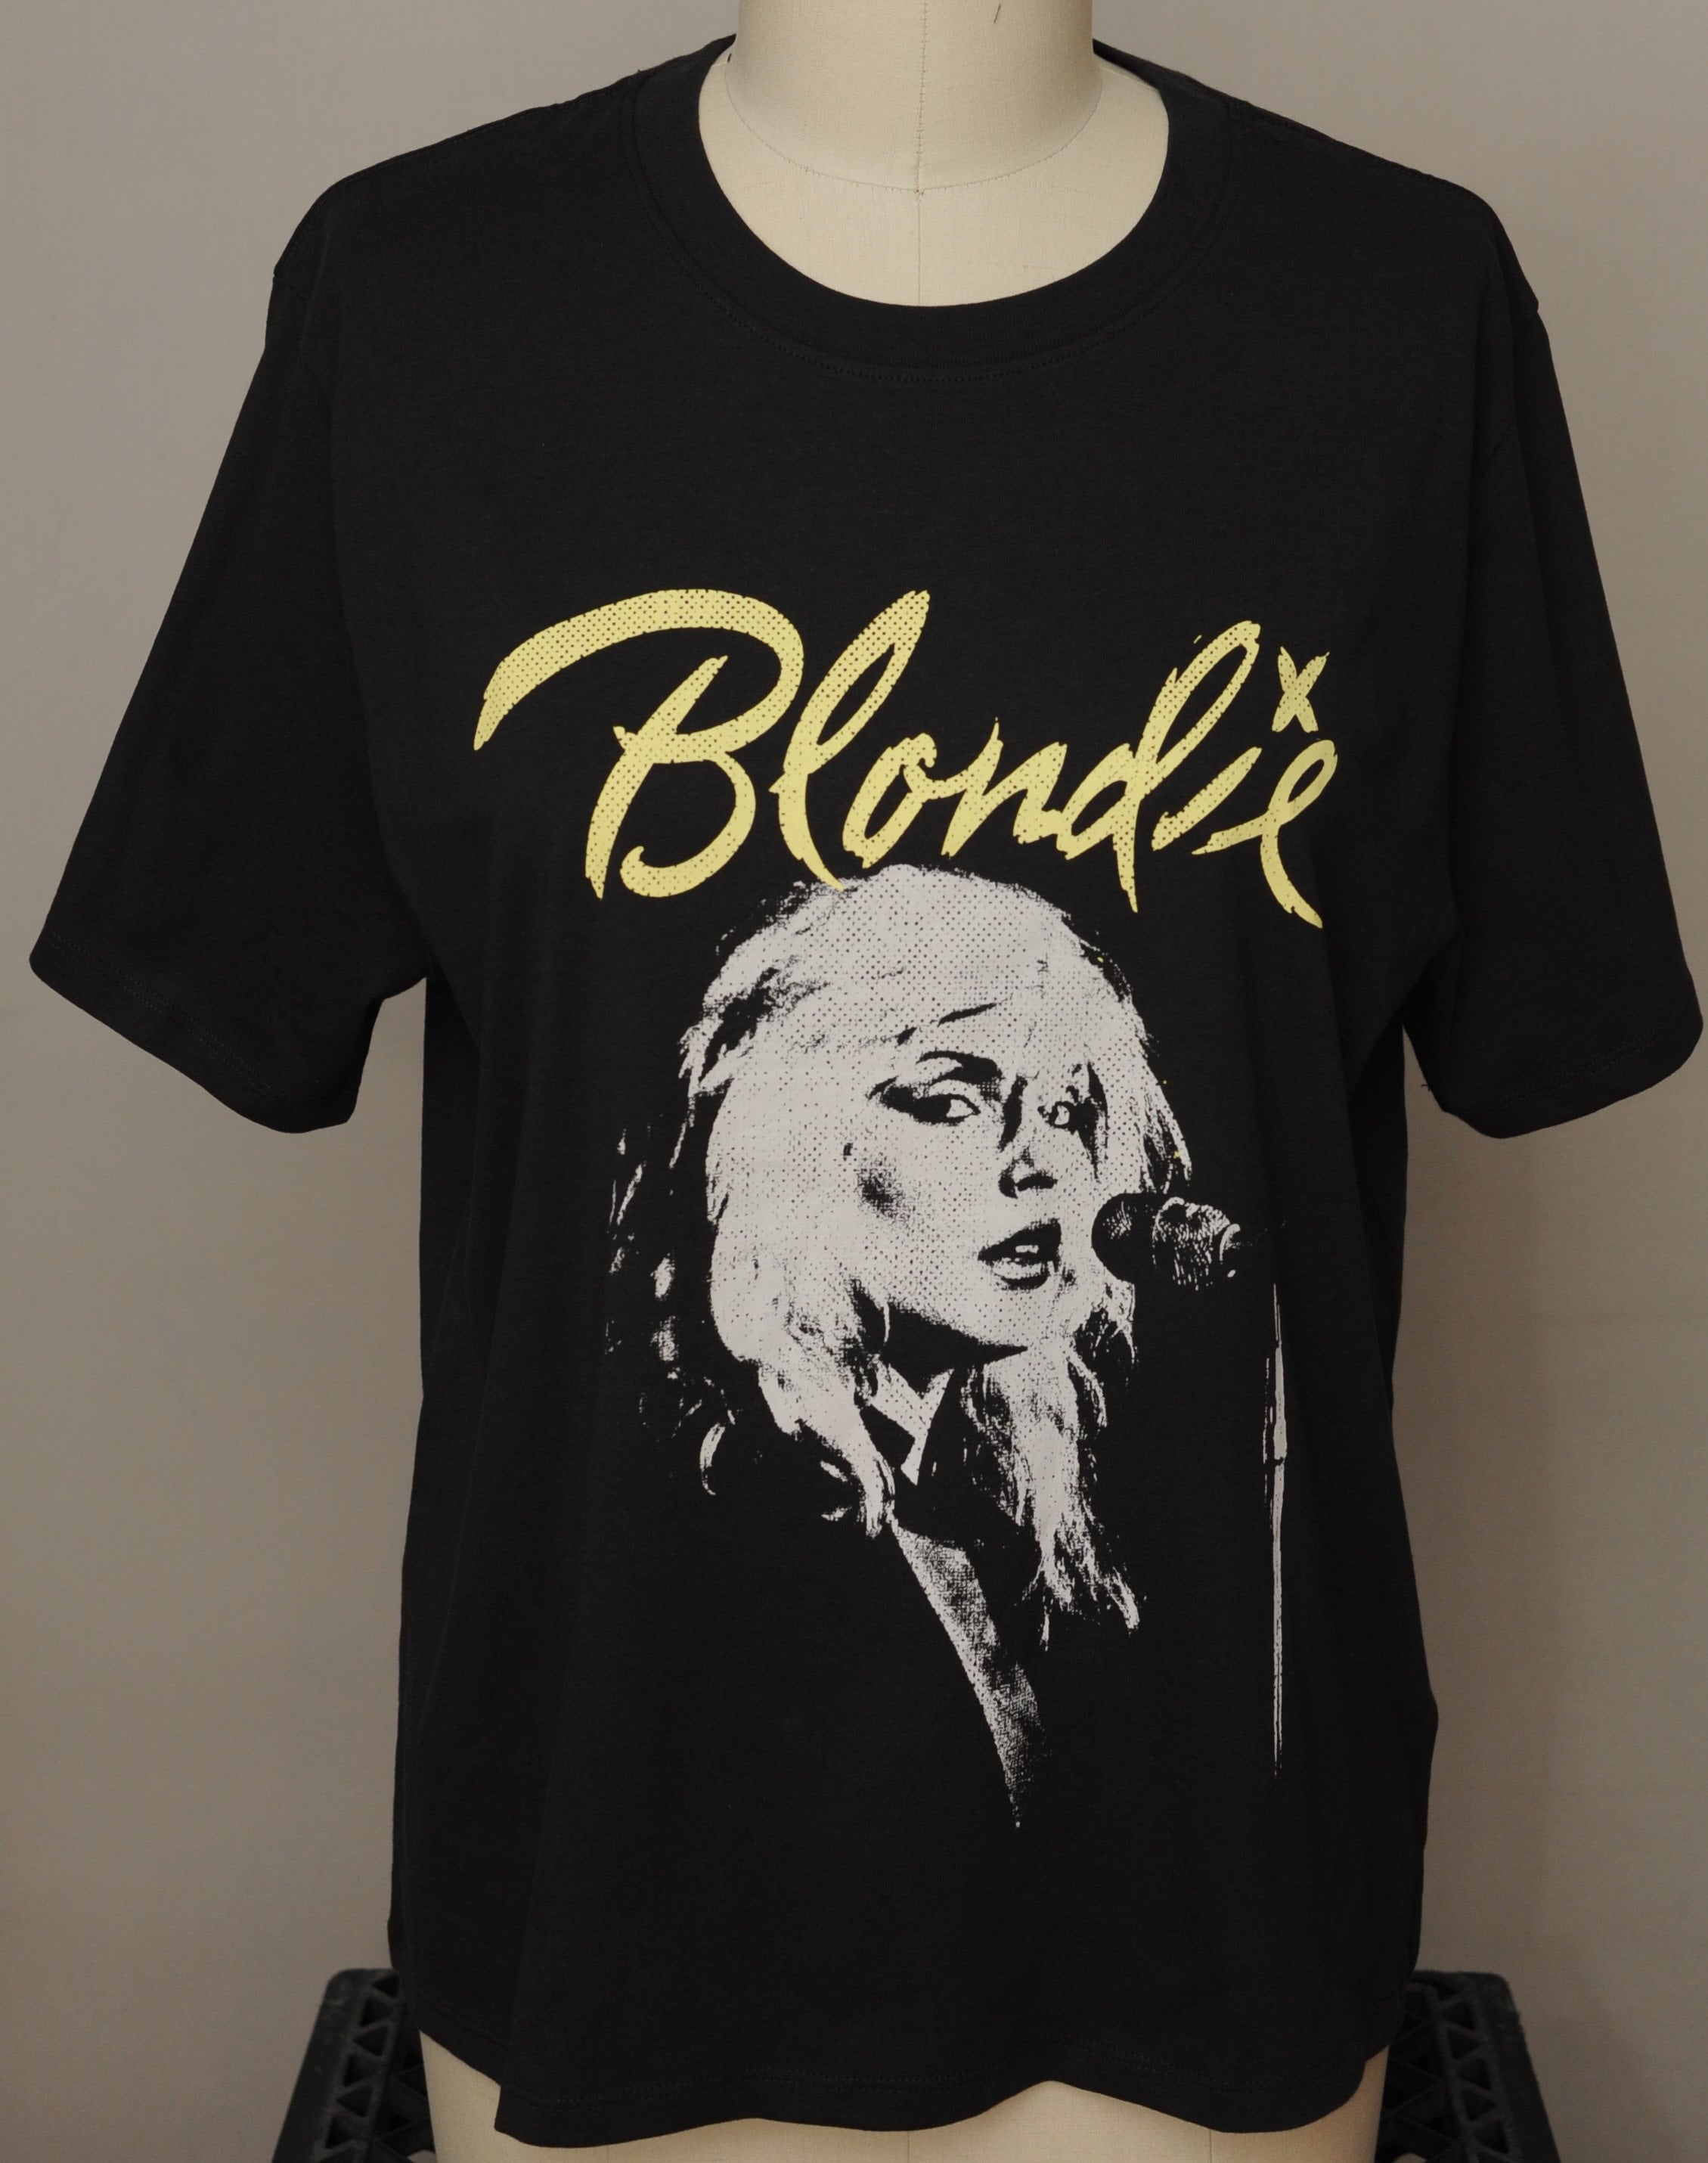 Blonde bolt crop band tee – Bad to the Blonde